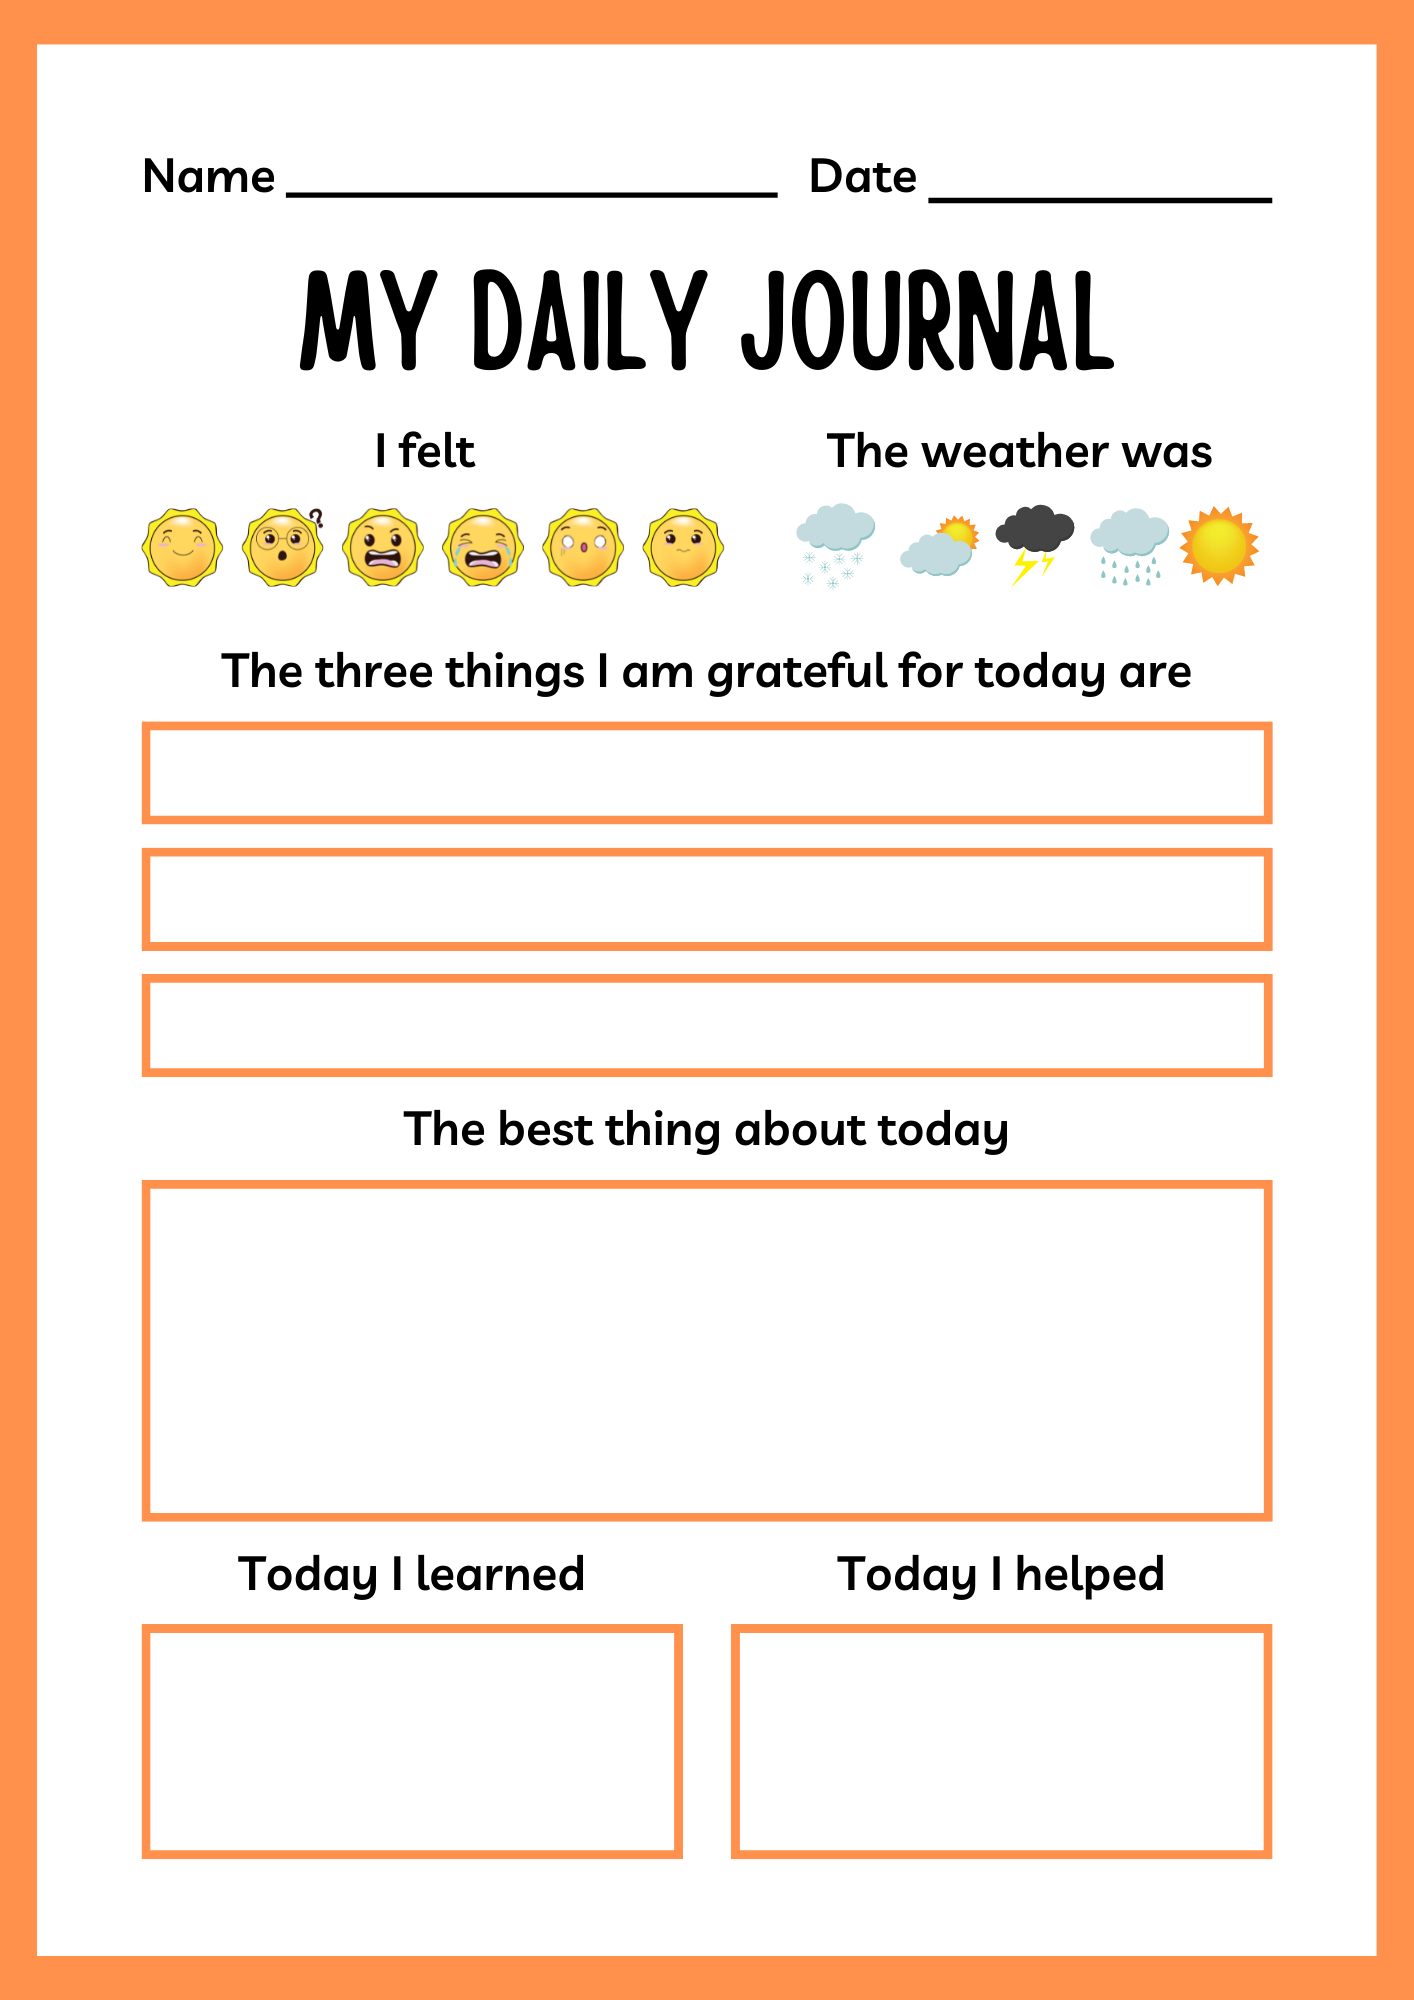 Learn How To Journal - Benefits And Printable Sheet Included! | Kids Activity